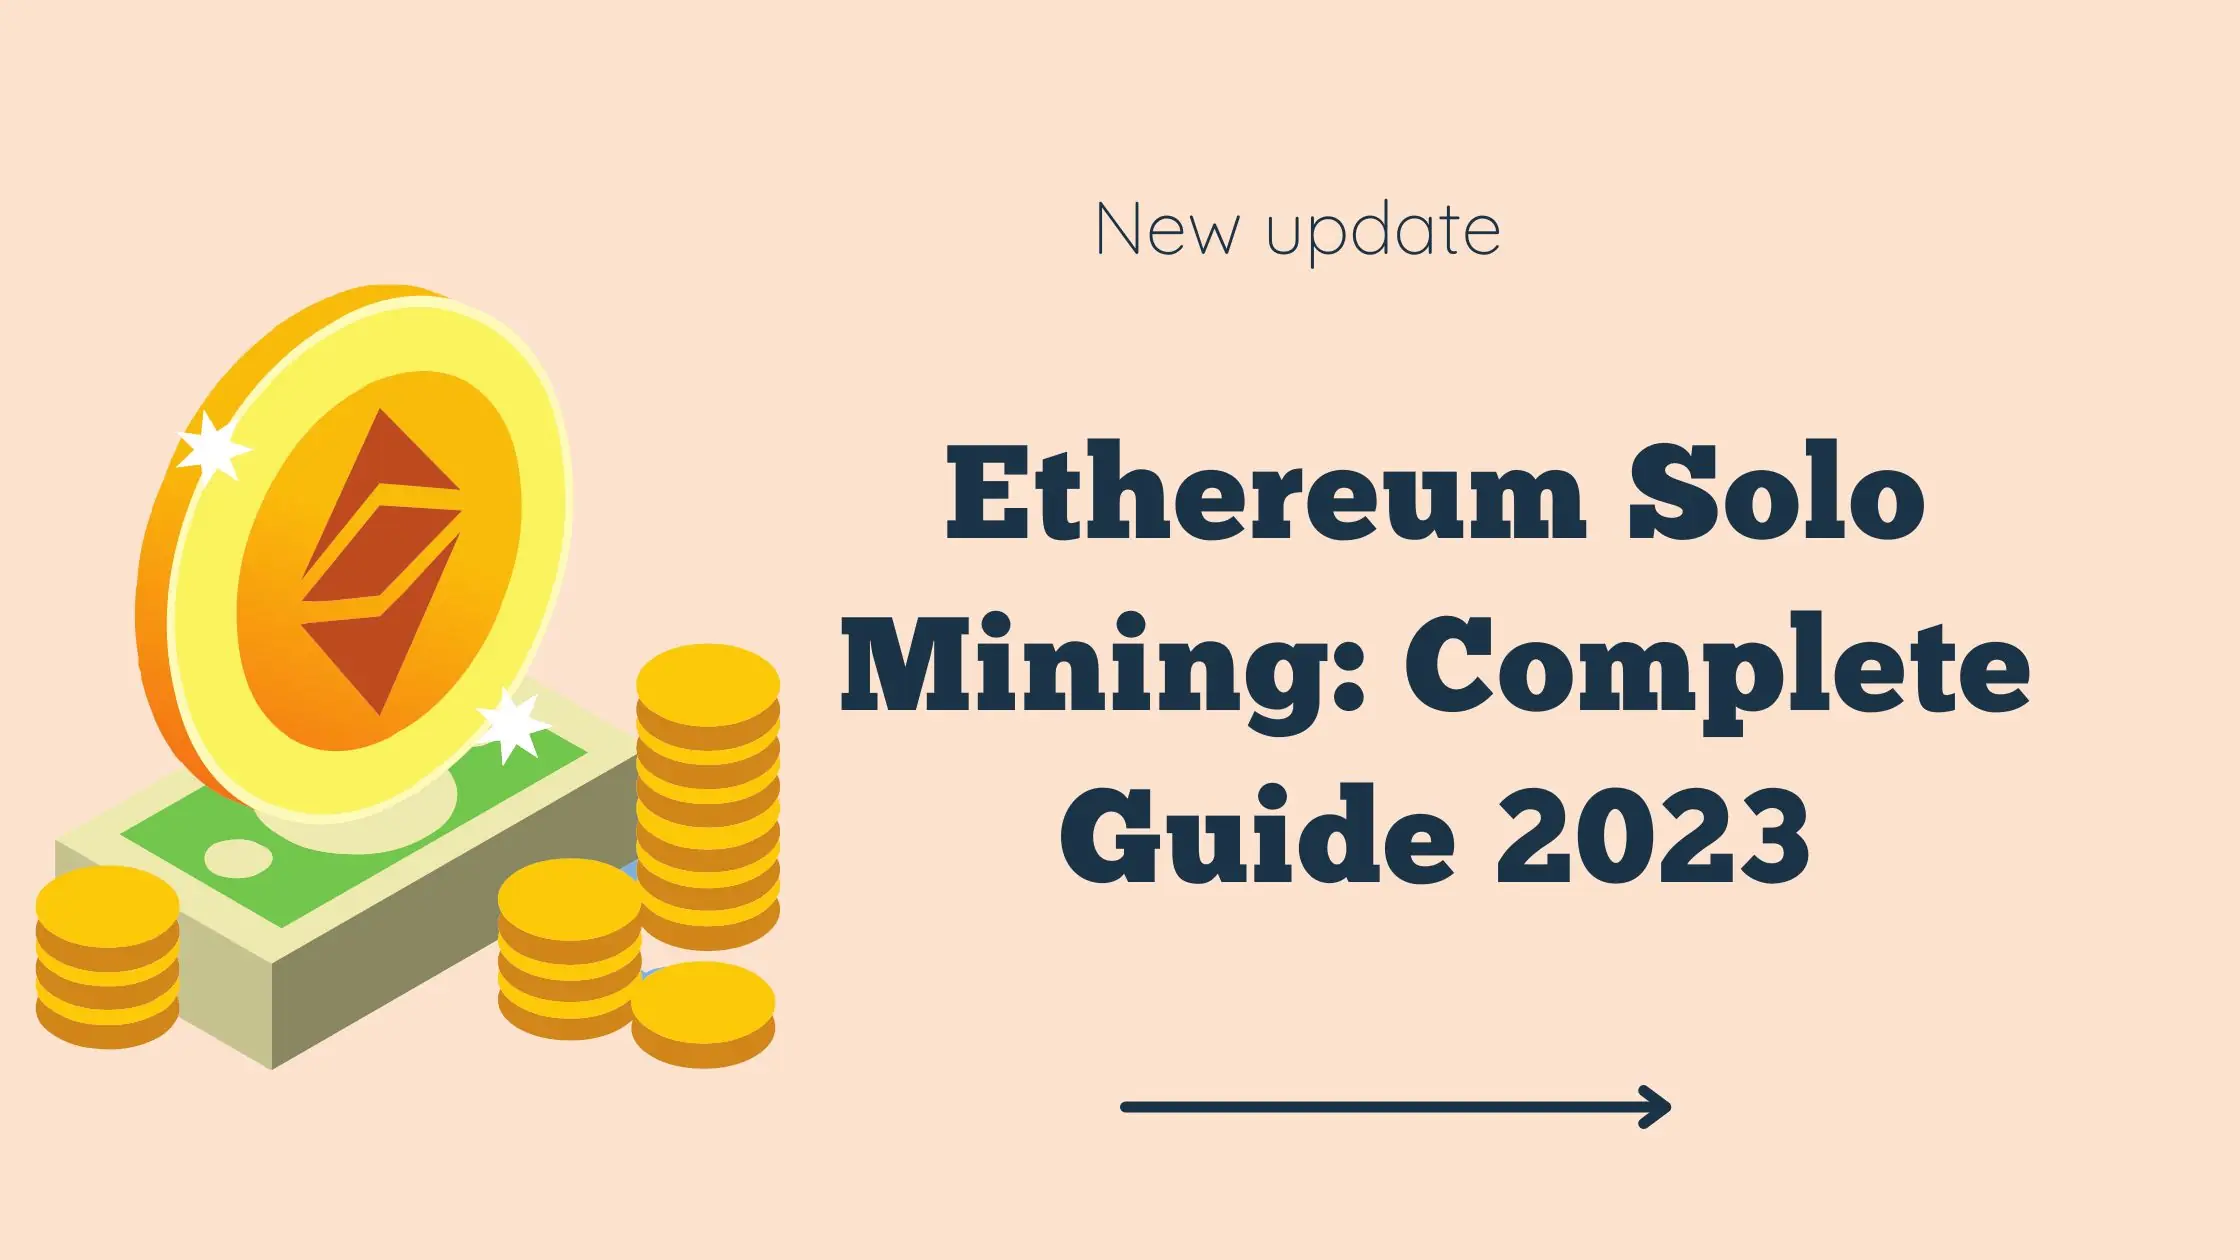 Ethereum Solo Mining: Complete Guide 2023